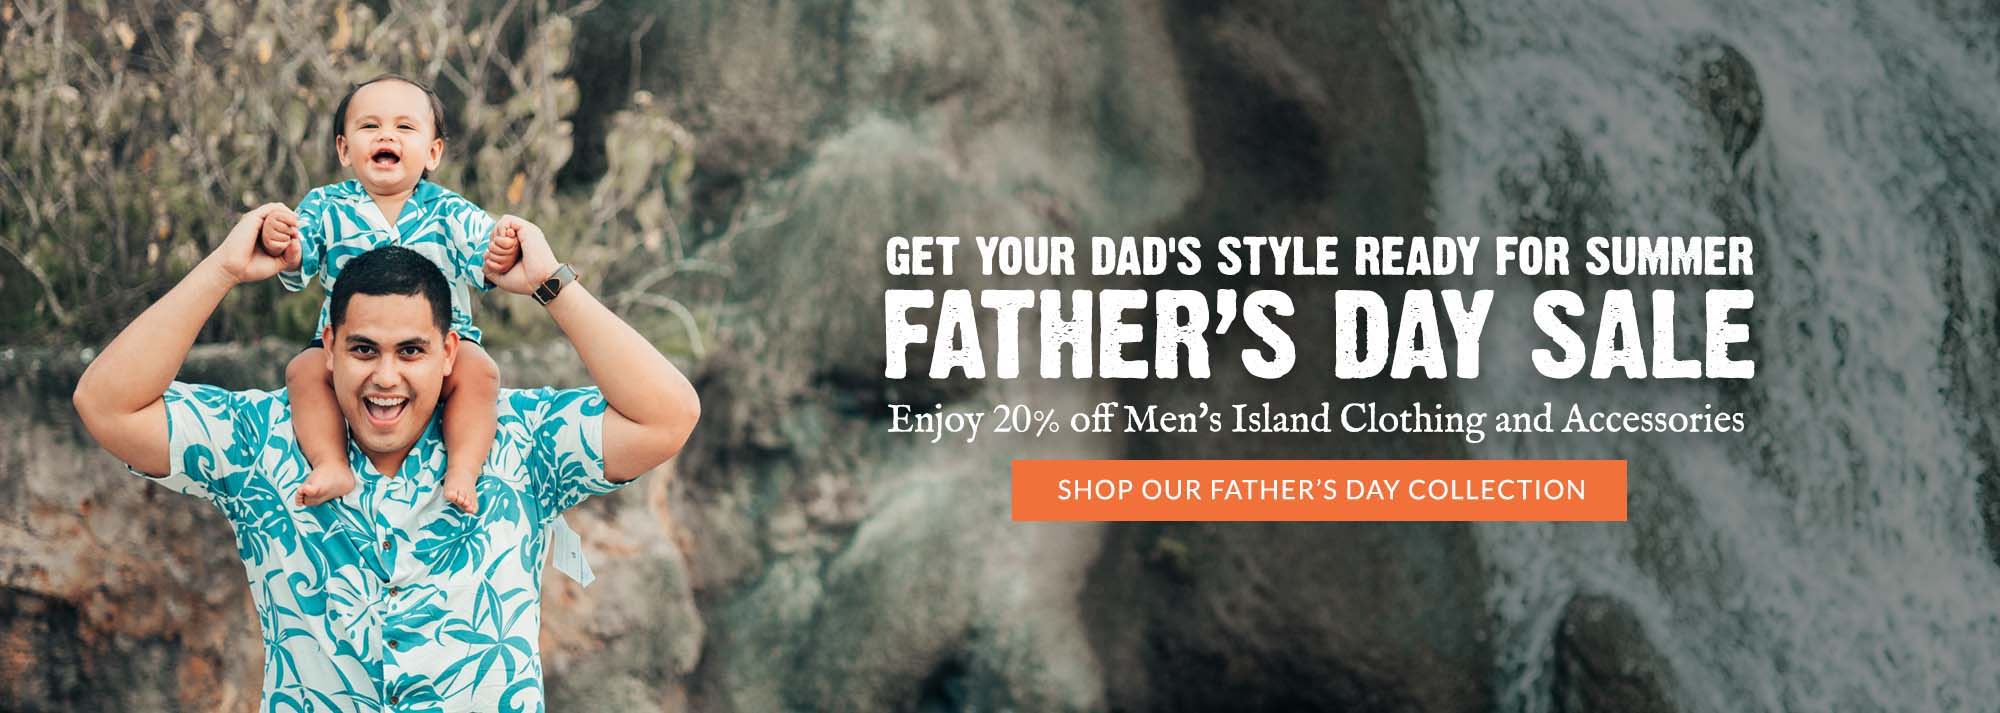 All Hail the father. Fiercely loyal, unabashedly sentimental, goofy, wise, and always ready with really bad jokes and really good advice. Celebrate this Fathers Day with 20% off extraordinary gifts for the man you call Dad.